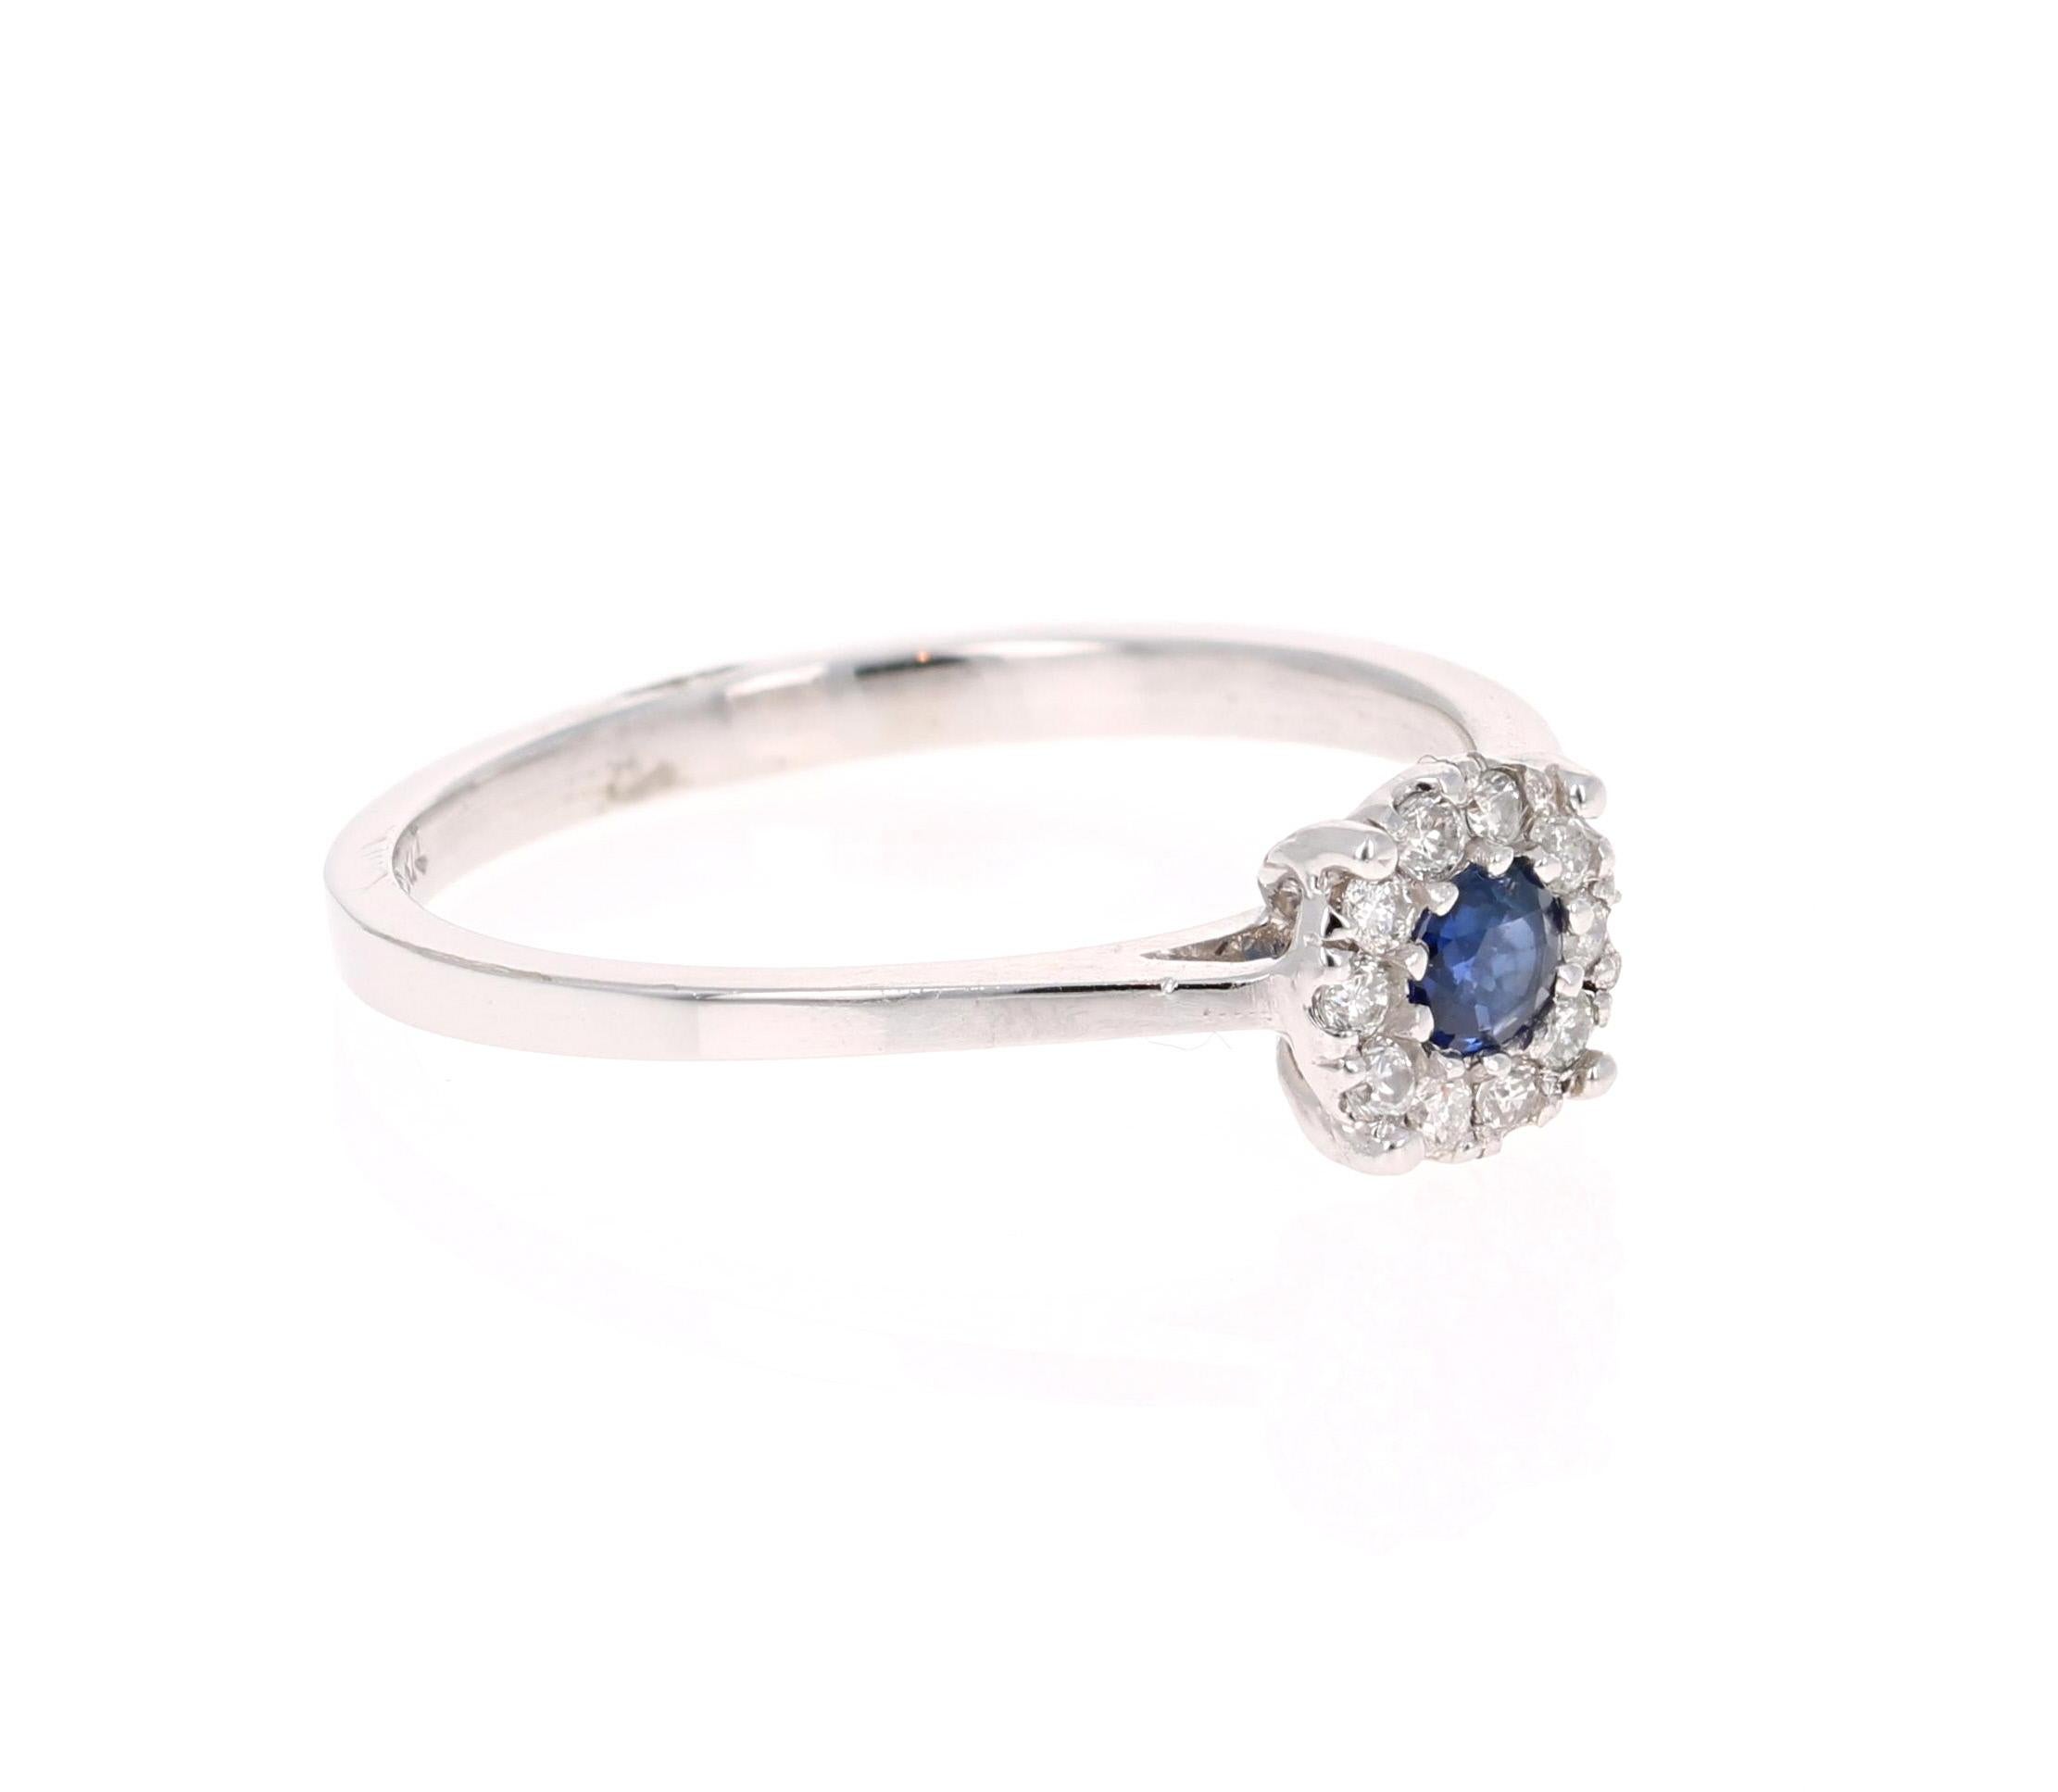 This delicate and dainty beauty has a Round Cut Blue Sapphire that weighs 0.12 Carats and has 10 Round Cut Diamonds that weighs 0.11 Carats. The total carat weight of the ring is 0.23 Carats. 

It is set in 14 Karat White Gold and weighs 1.9 grams.